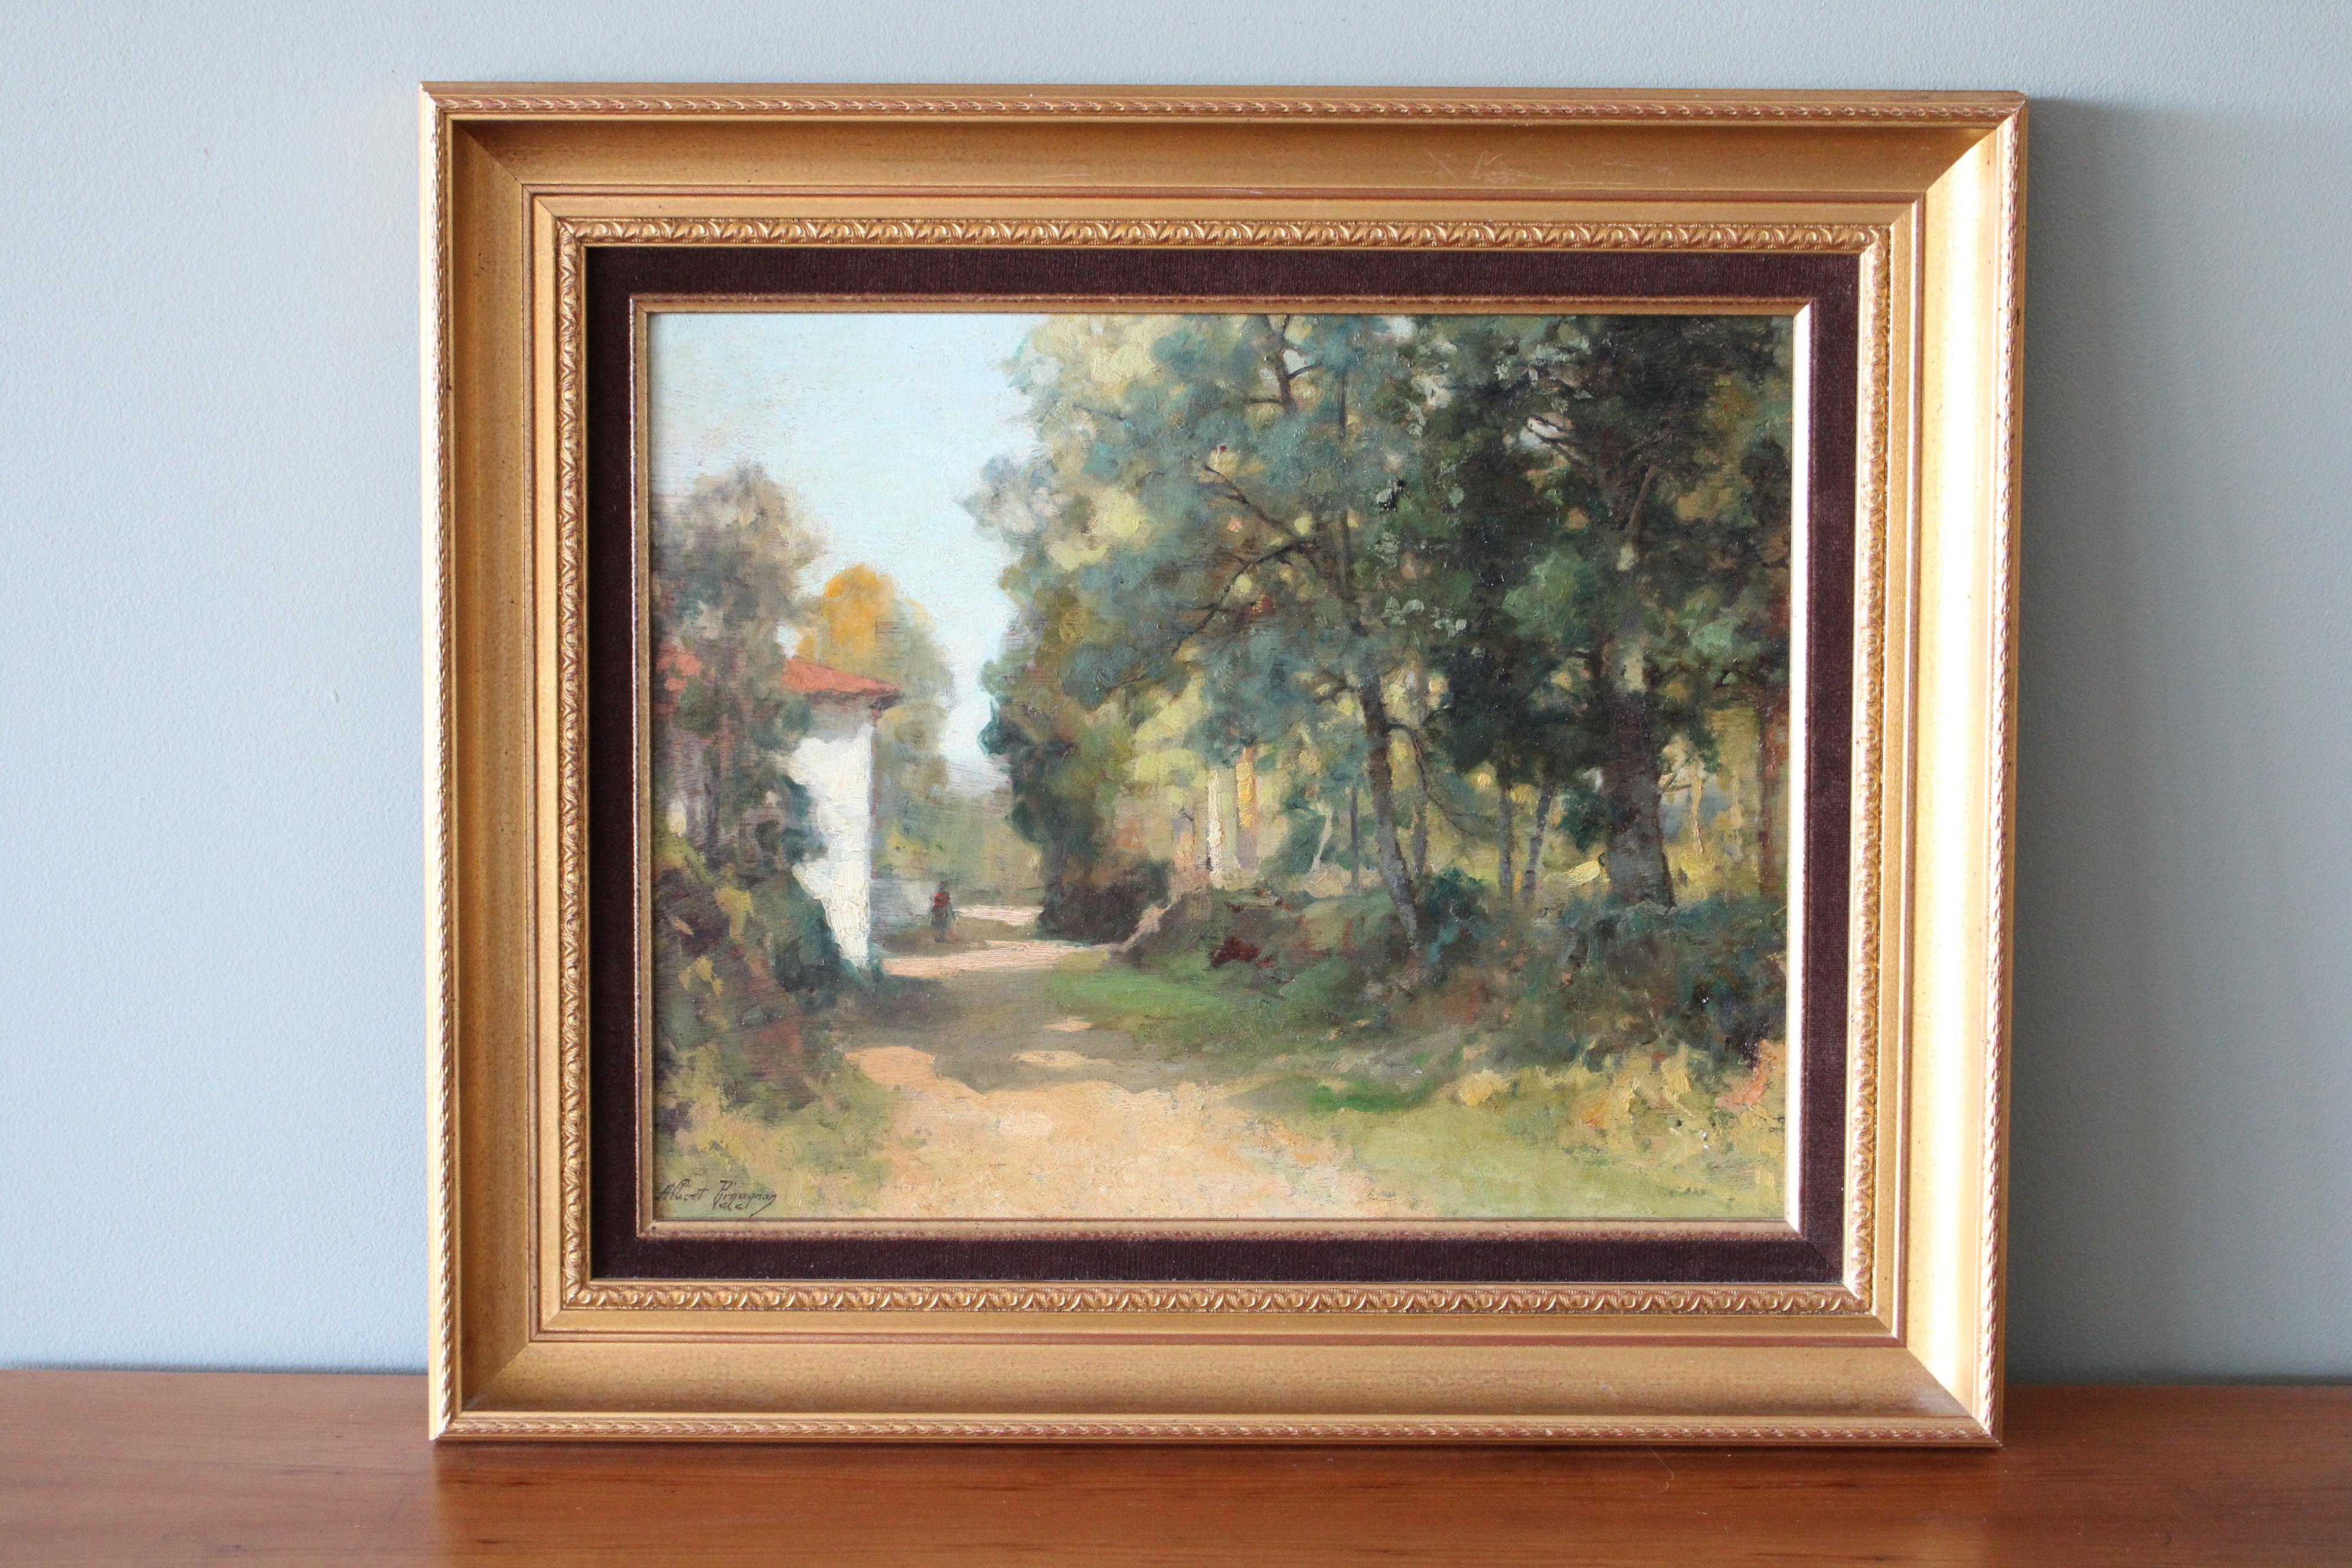 Vintage country road landscape oil painting on wood by French artist, Albert Regagnon, it's from the 1930's and signed in the lower left corner.  A woman walks down a country pathway past a house whose stone facade gleams in the sunshine.  The